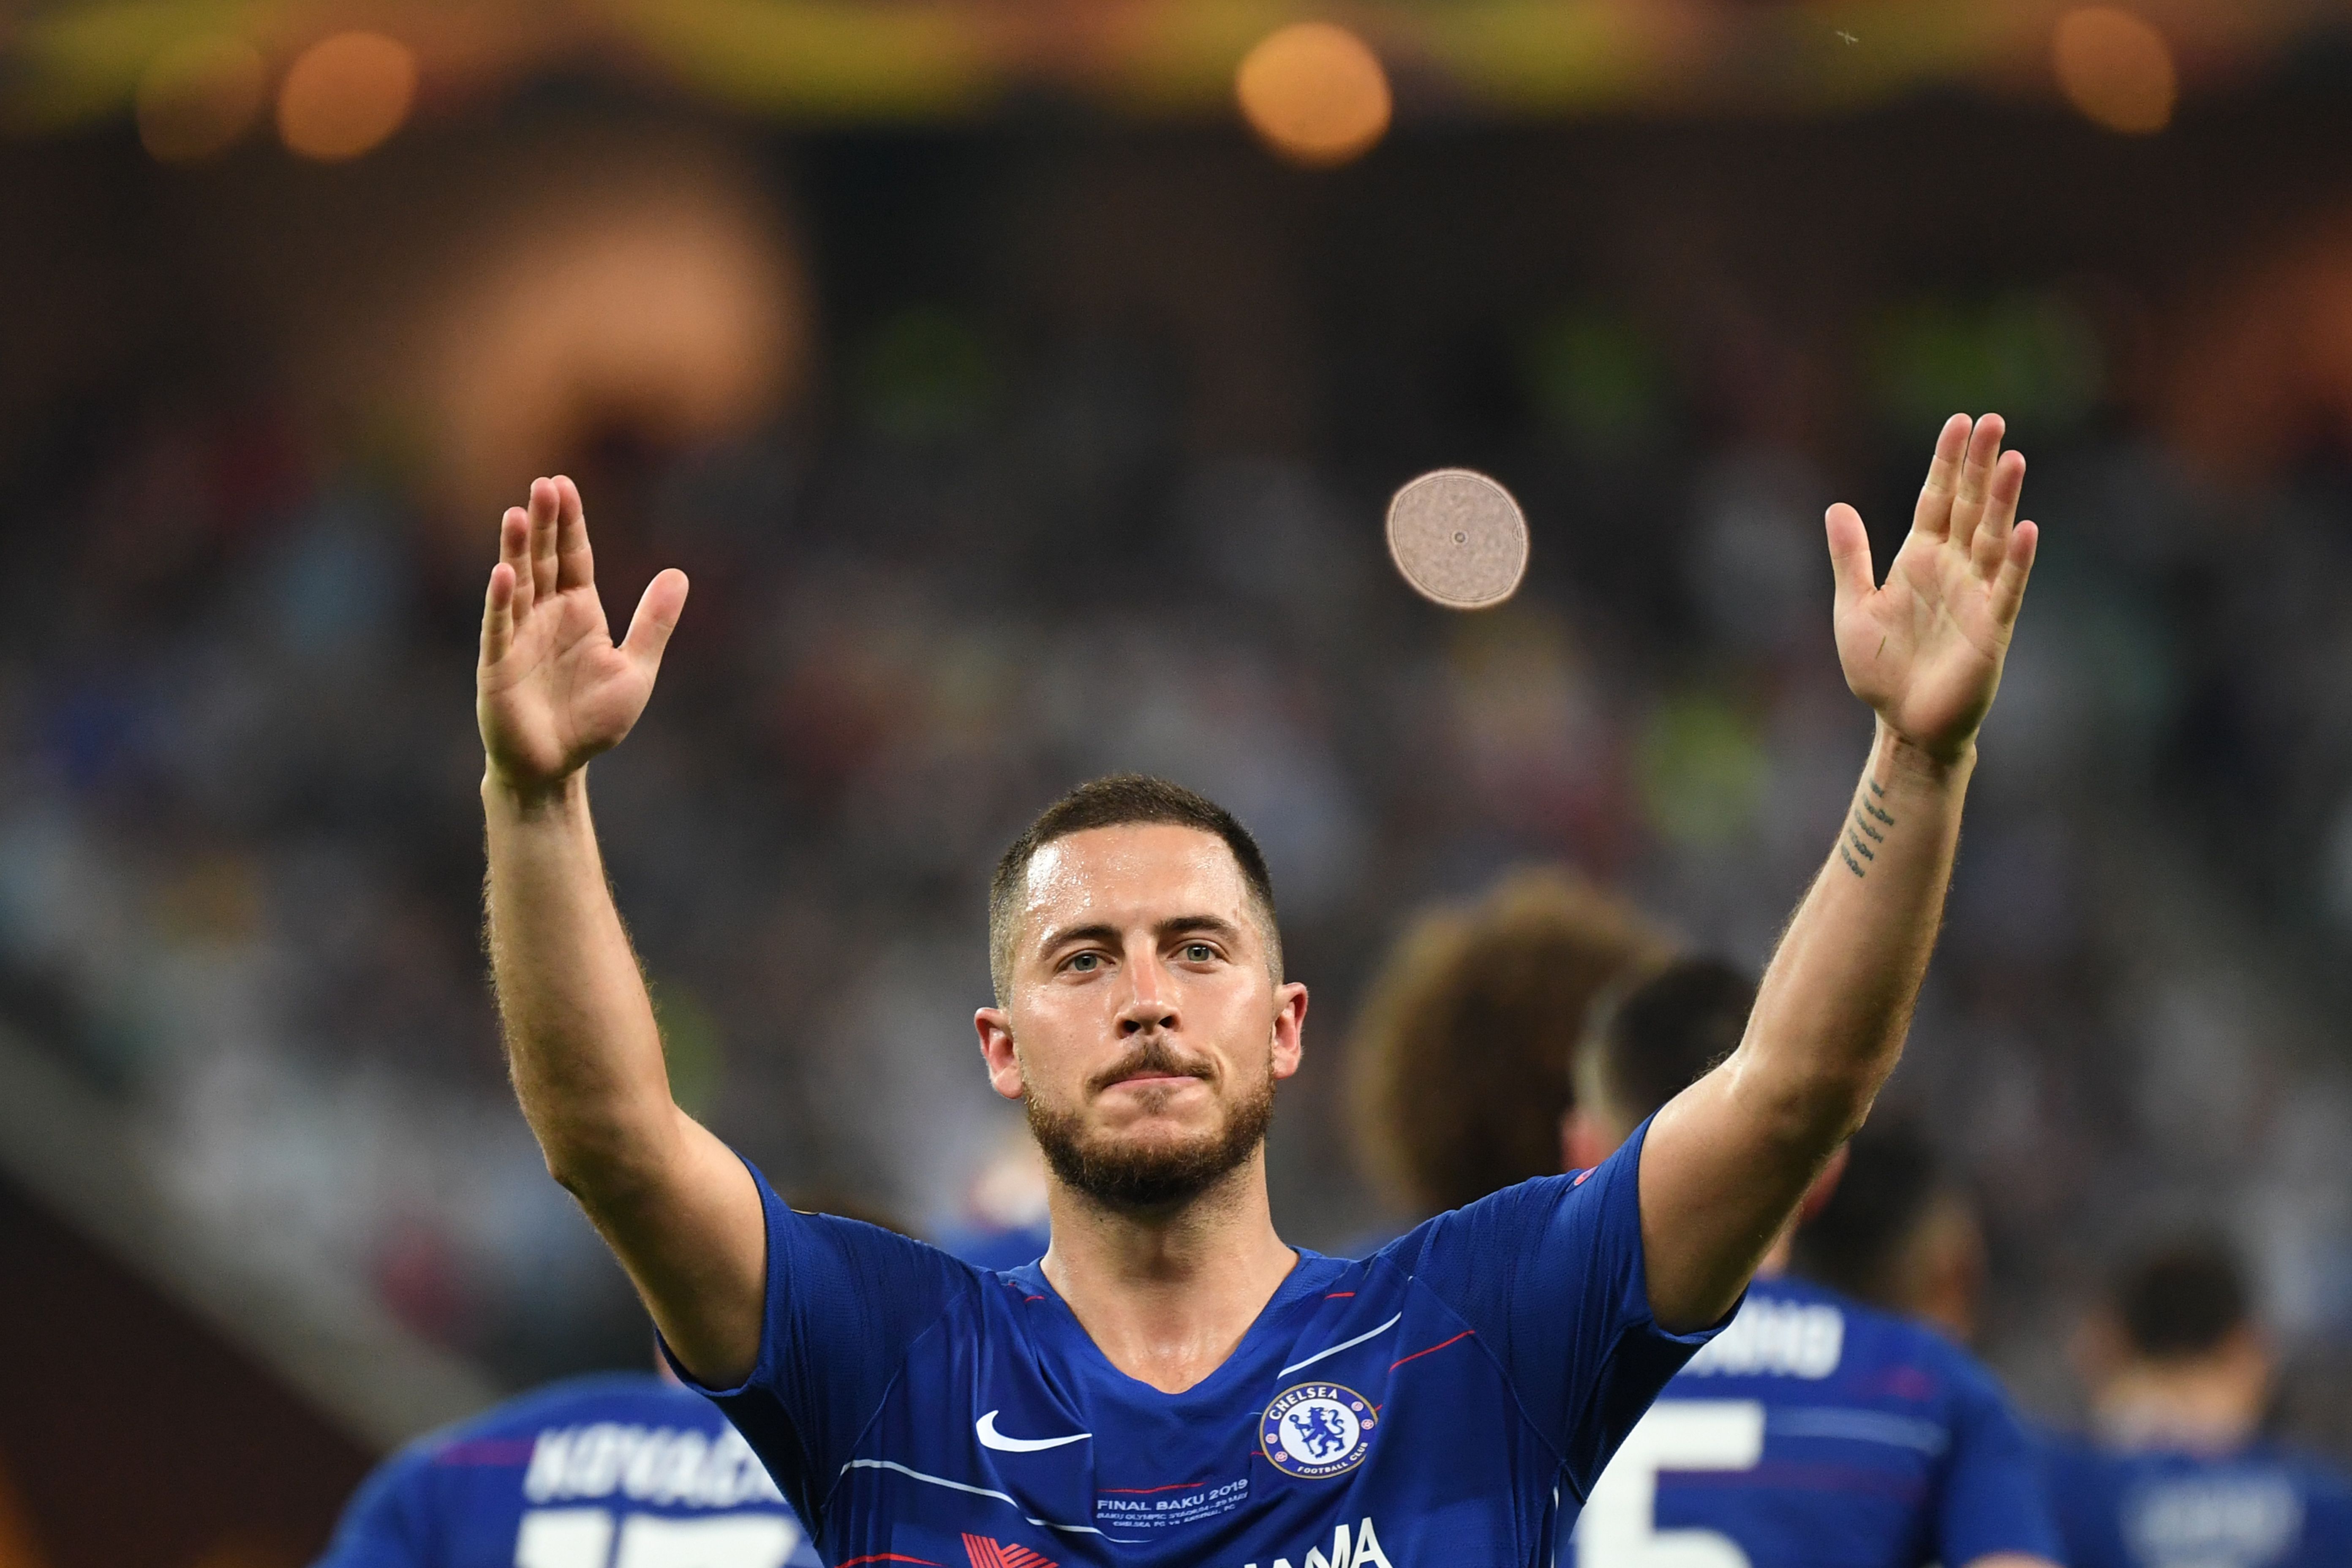 Chelsea's Belgian midfielder Eden Hazard  celebrates after celebrates after scoring a goal during the UEFA Europa League final football match between Chelsea FC and Arsenal FC at the Baku Olympic Stadium in Baku, Azerbaijian, on May 29, 2019. (Photo by OZAN KOSE / AFP)        (Photo credit should read OZAN KOSE/AFP/Getty Images)